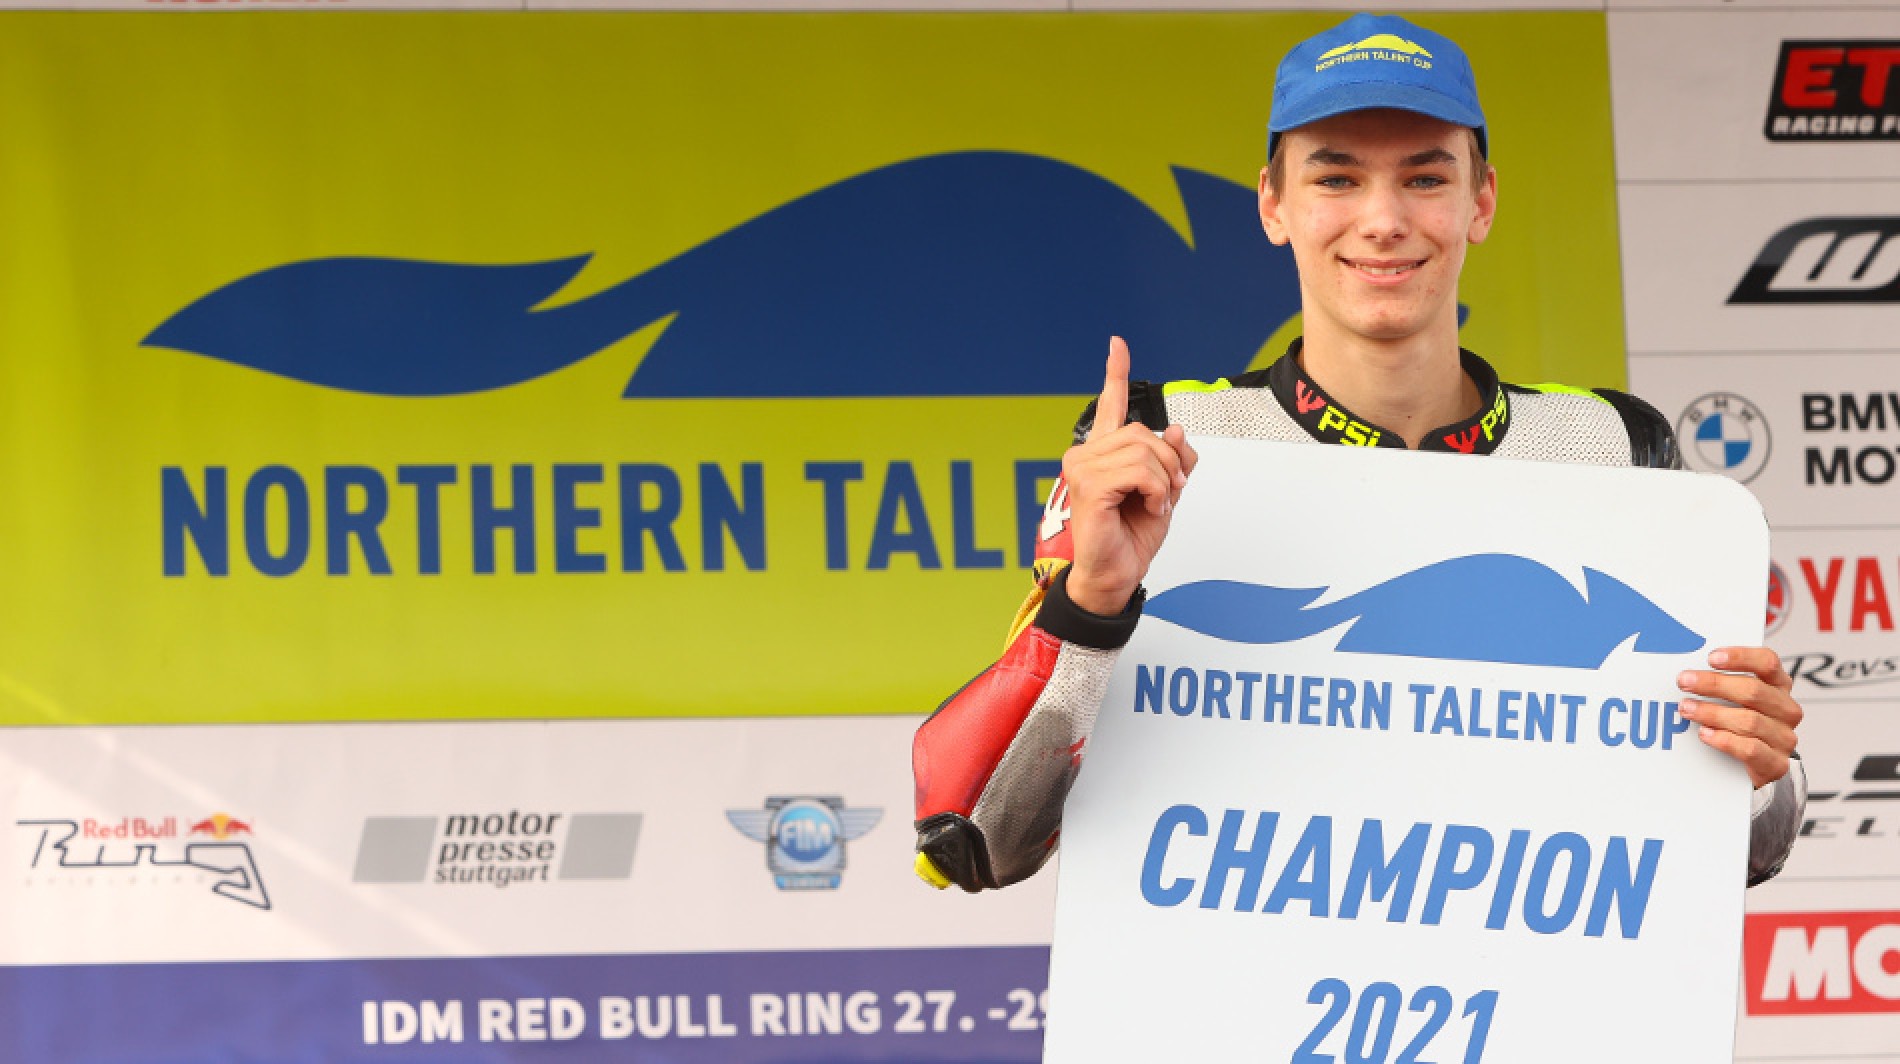 Jakub Gurecky is the 2021 Northern Talent Cup Champion